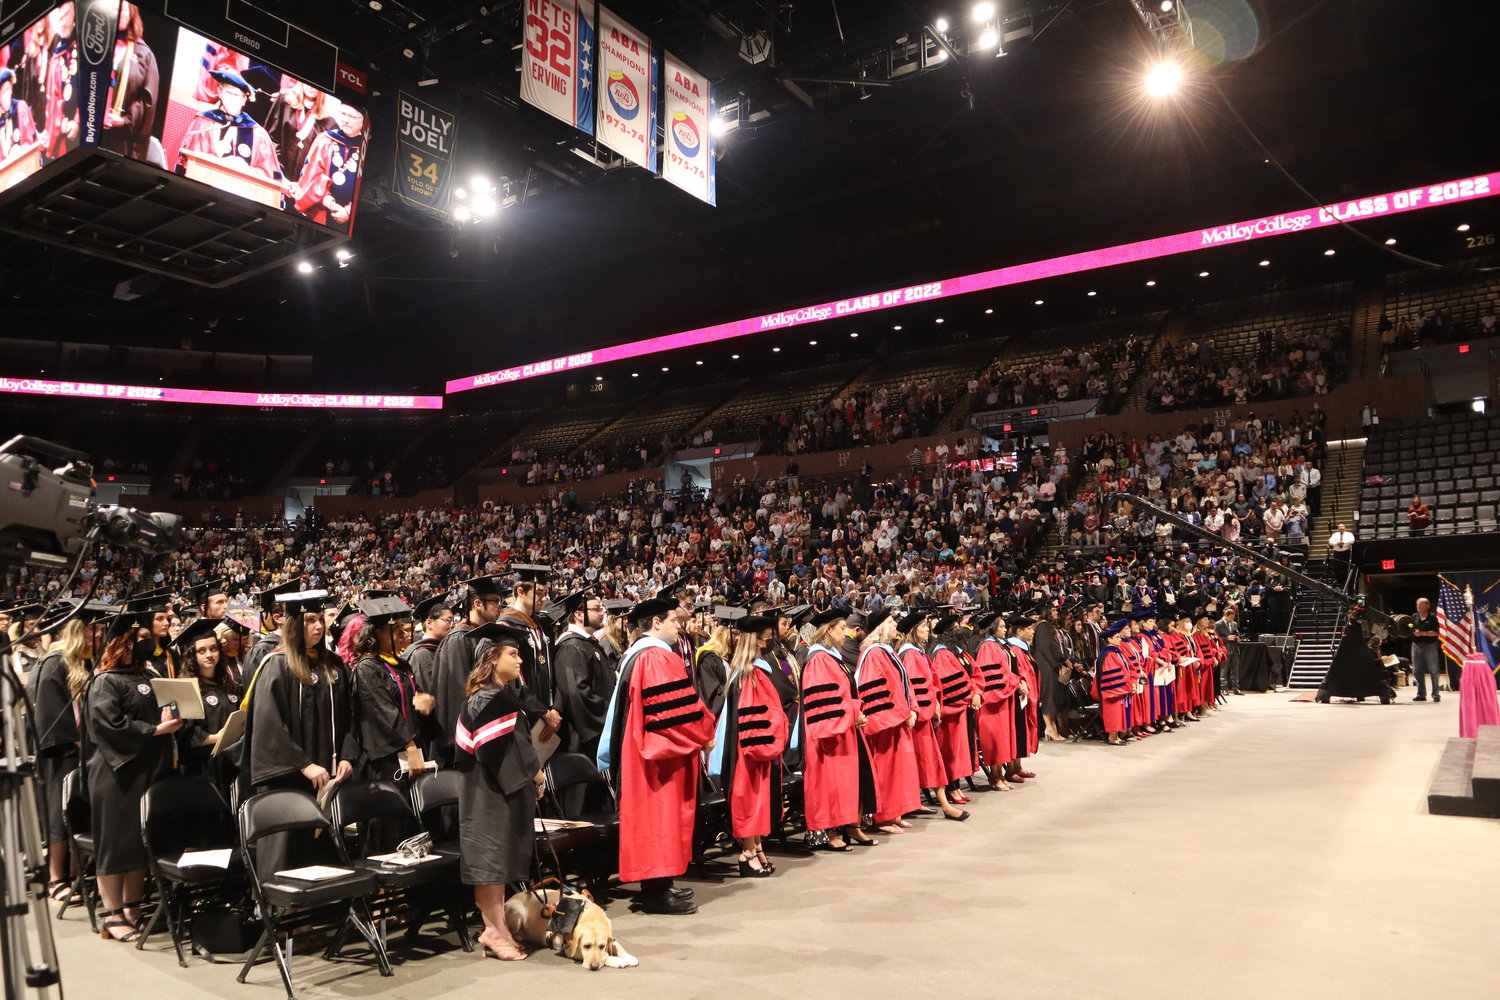 Molloy College hosted its final graduation ceremony on May 24 at Nassau Coliseum. It will go by Molloy University starting June 1.